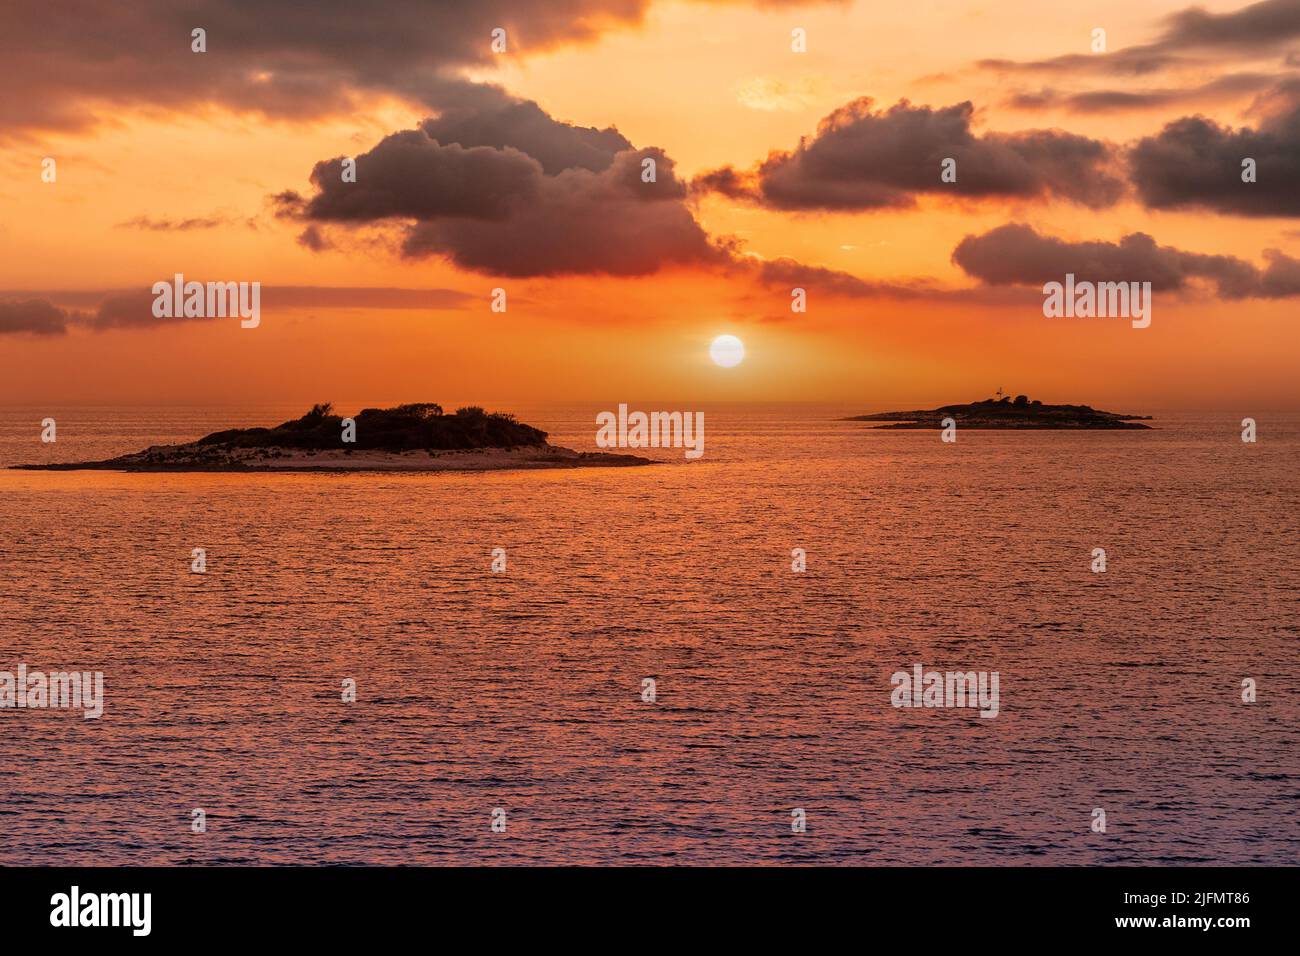 Golden Sunset into the sea with the silhouette of an island. Stock Photo